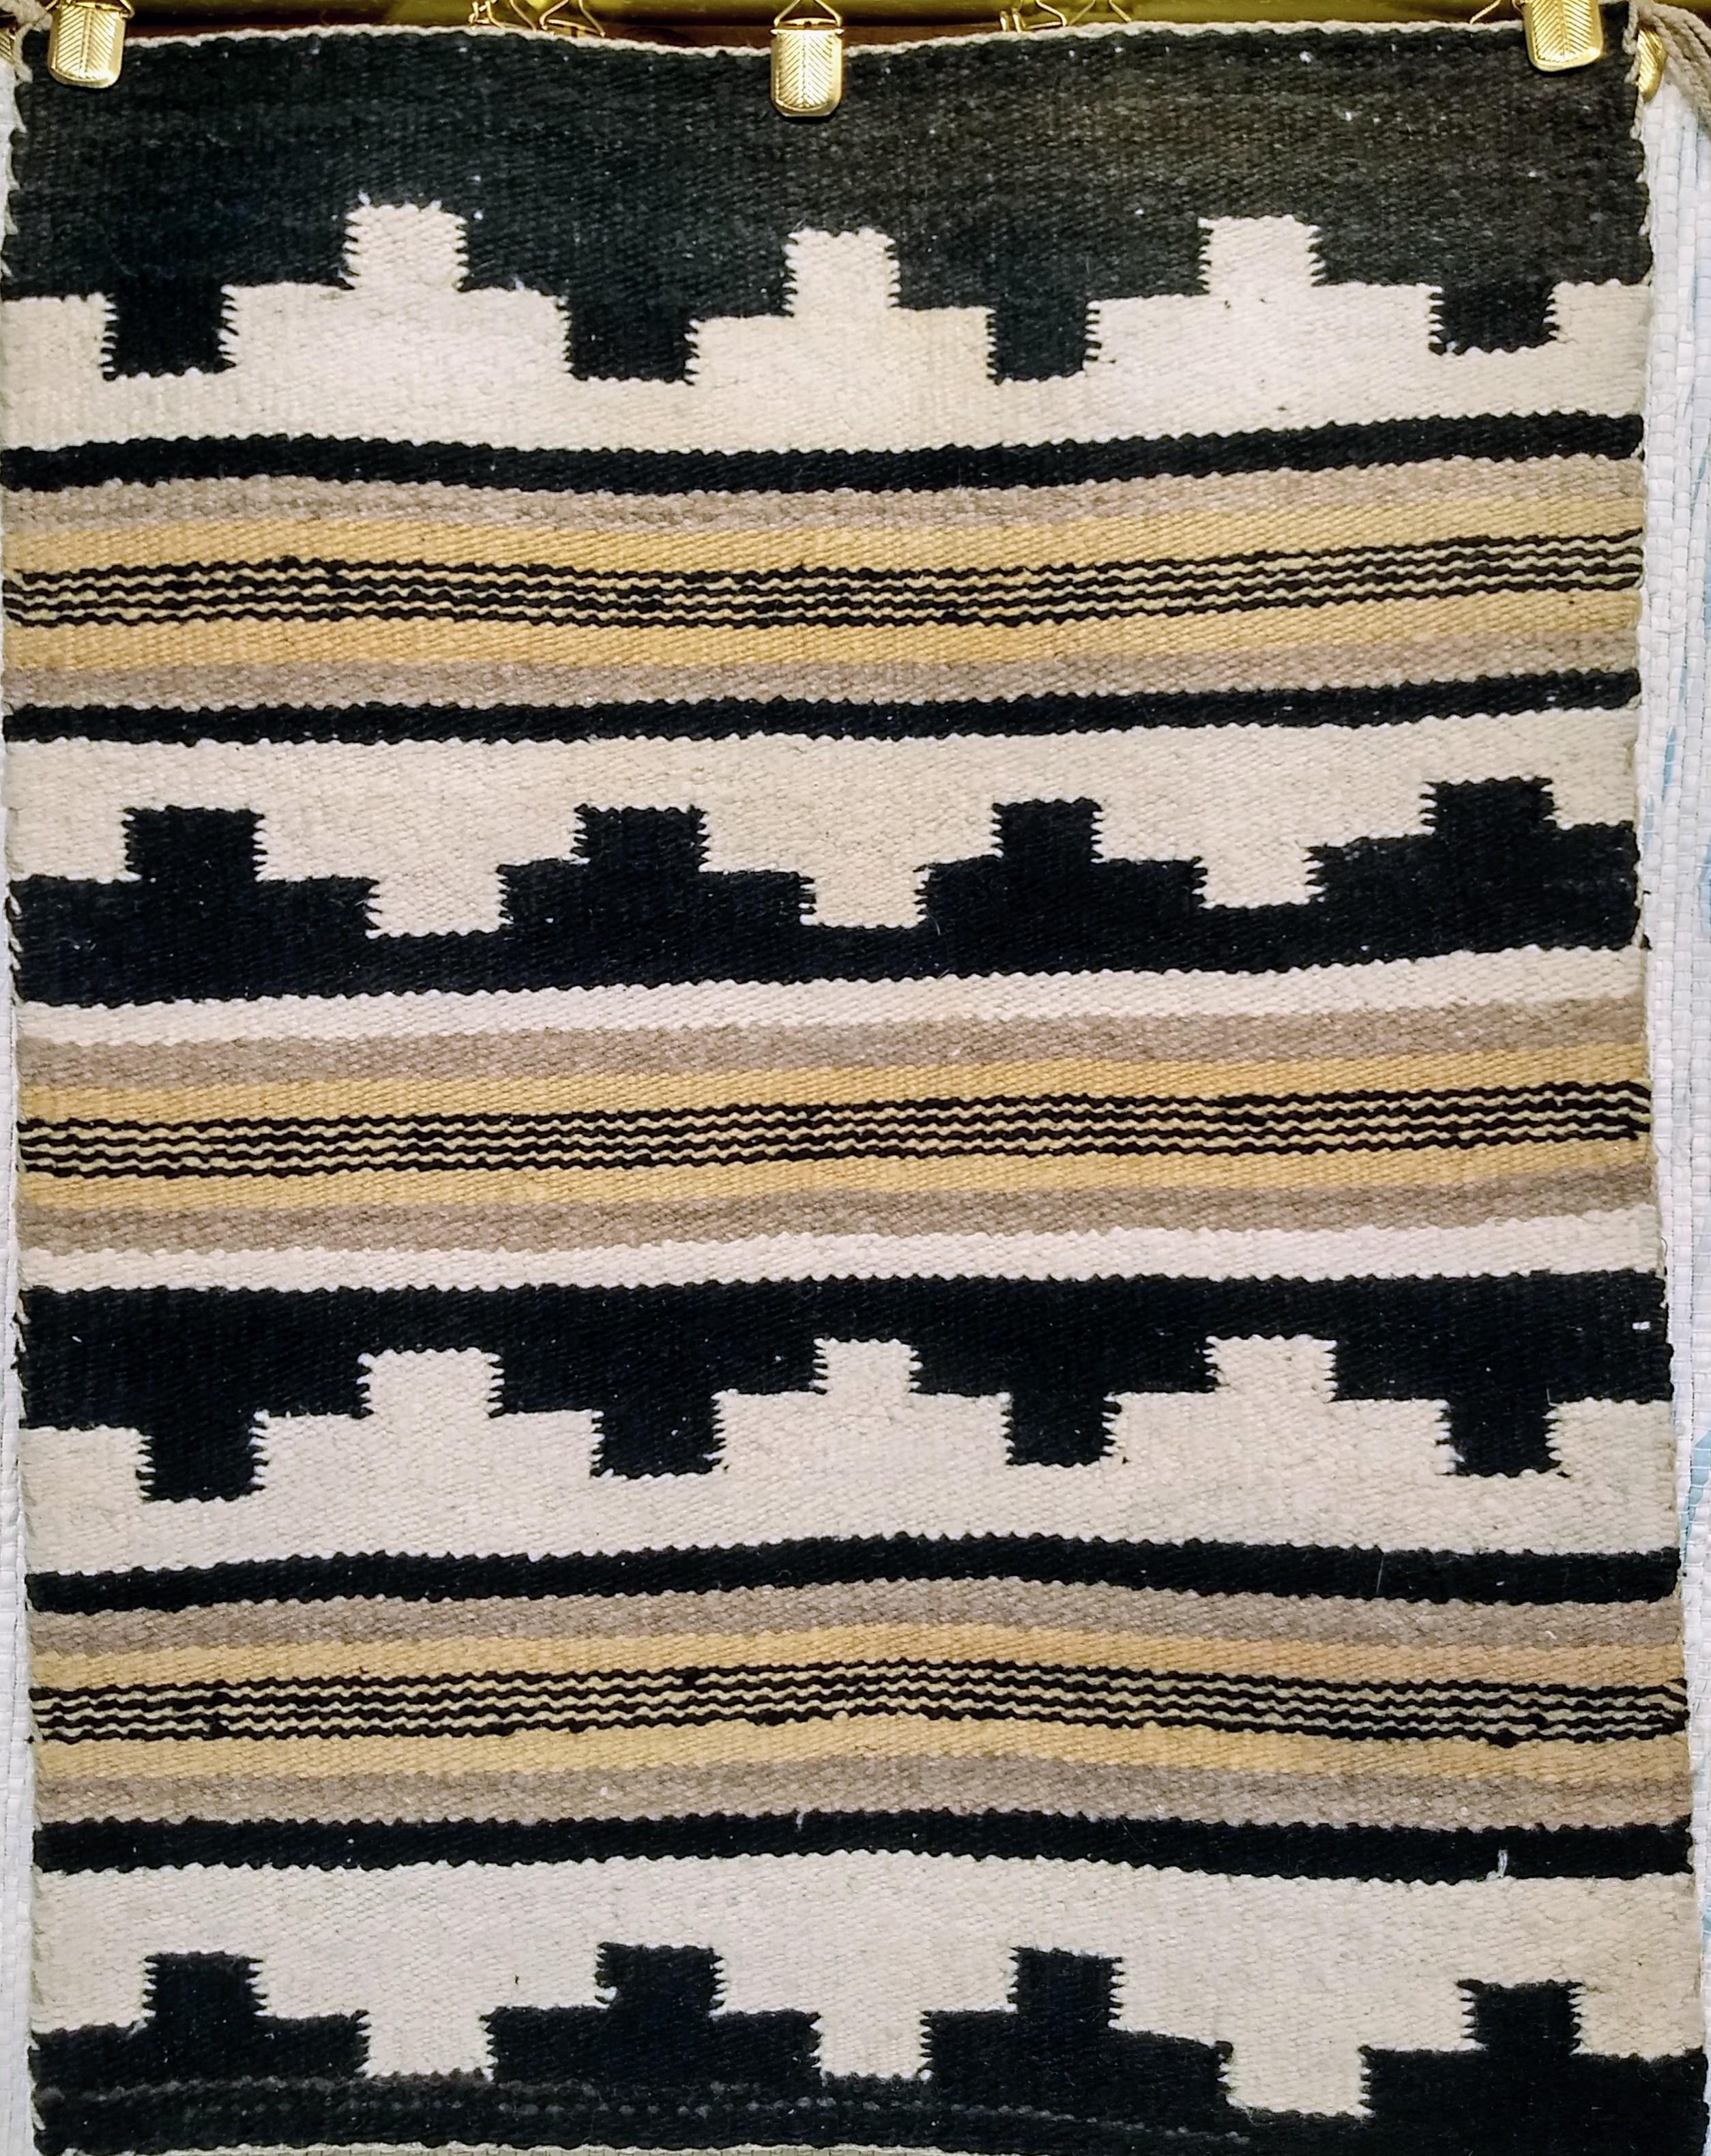 Beautiful vintage native American Navajo rug from the Southwest Area of the United States.  The Navajo rug has a striped pattern reminiscent of the Monument Valley in the Canyon de Chelly desert in the Southwest of United States in ivory, black, and